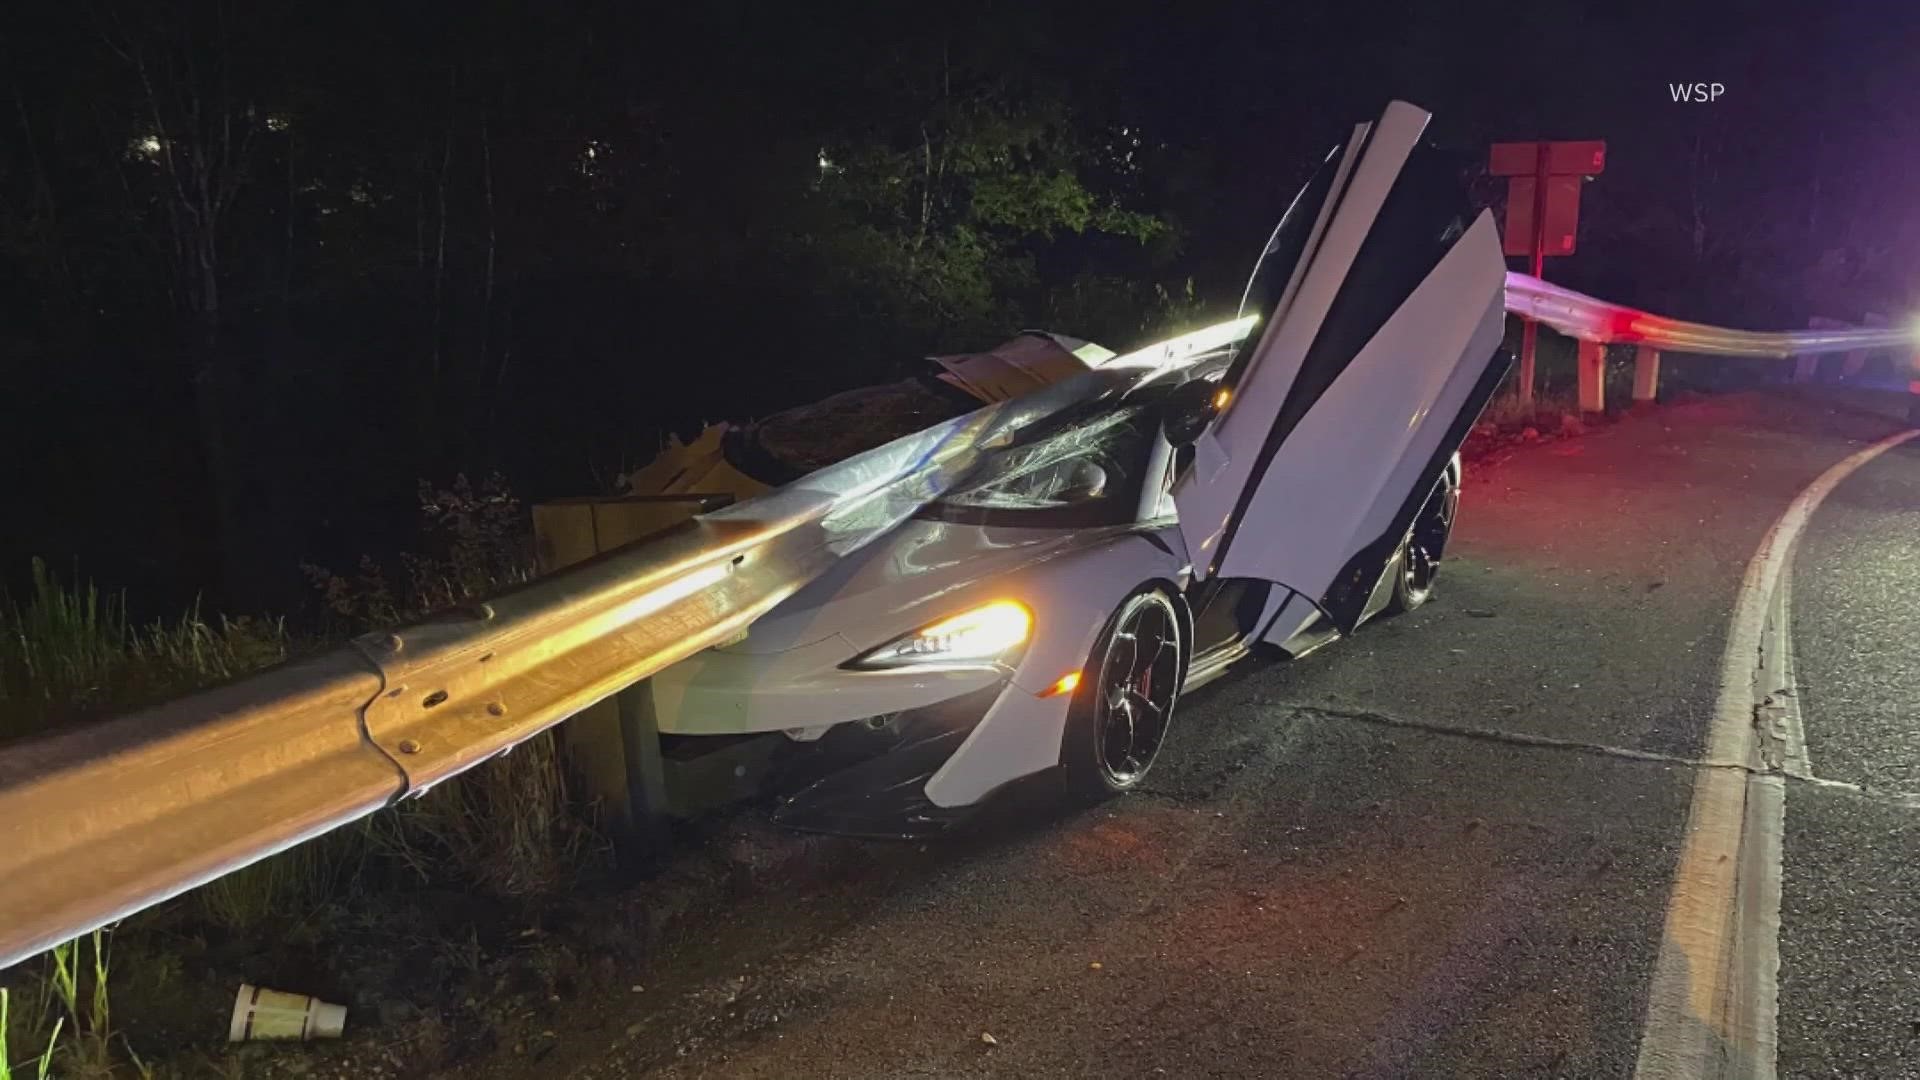 The $259,000 car was left crashed into a guard rail on eastbound state route 5-12 near Portland Ave.